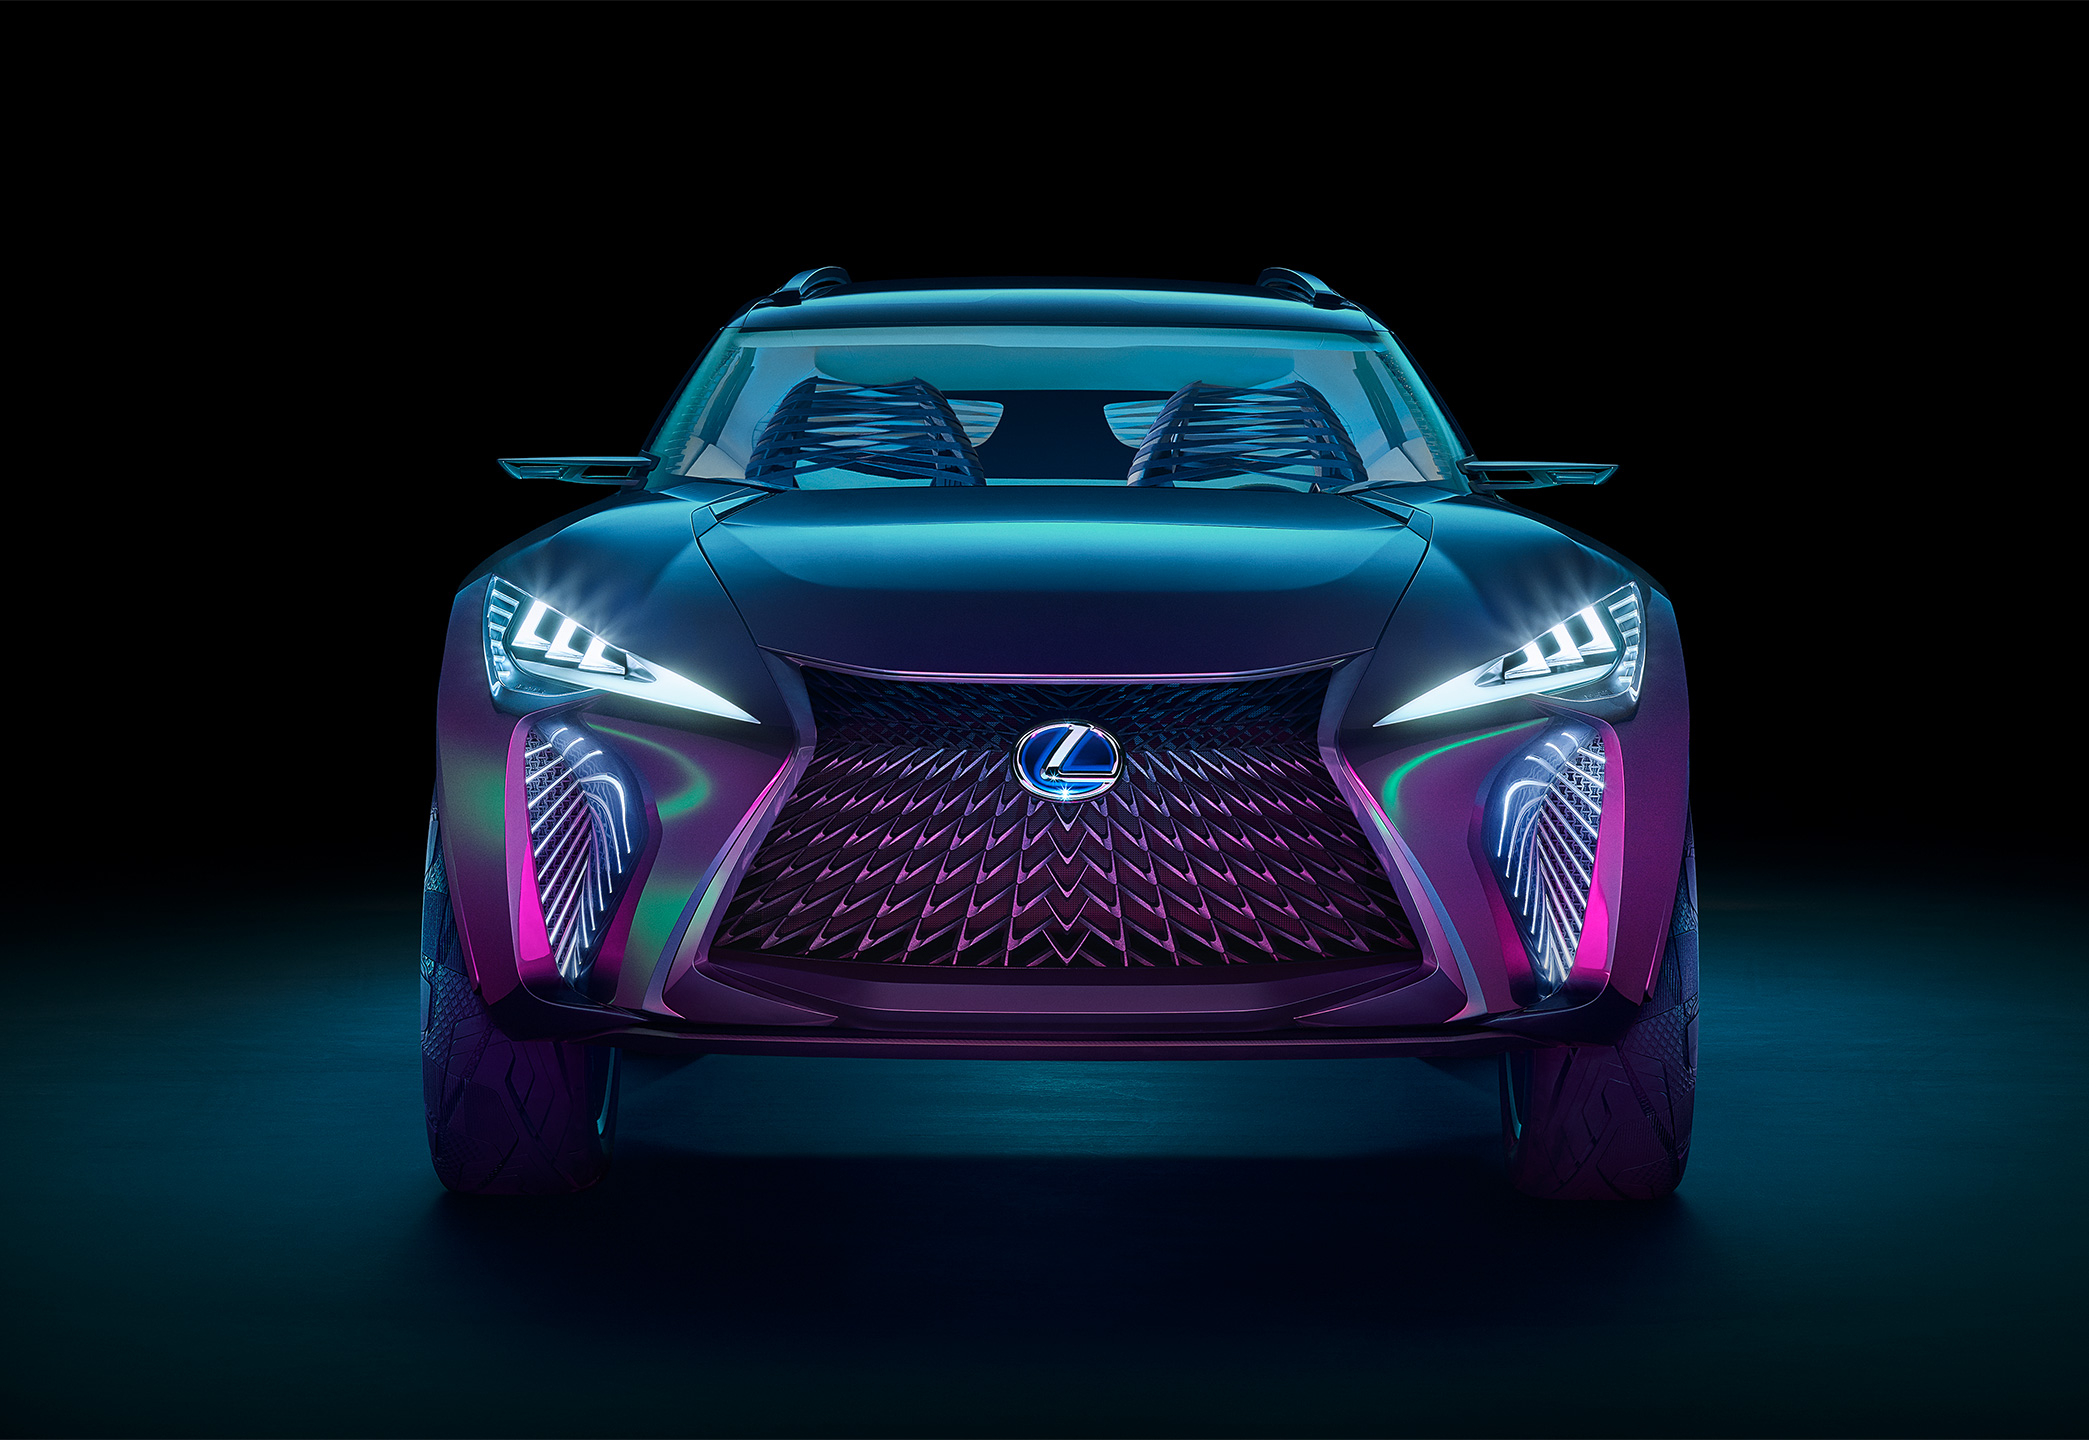 Art direction for Lexus ‘UX’ concept car. Photography by Qiu Yang (2018)